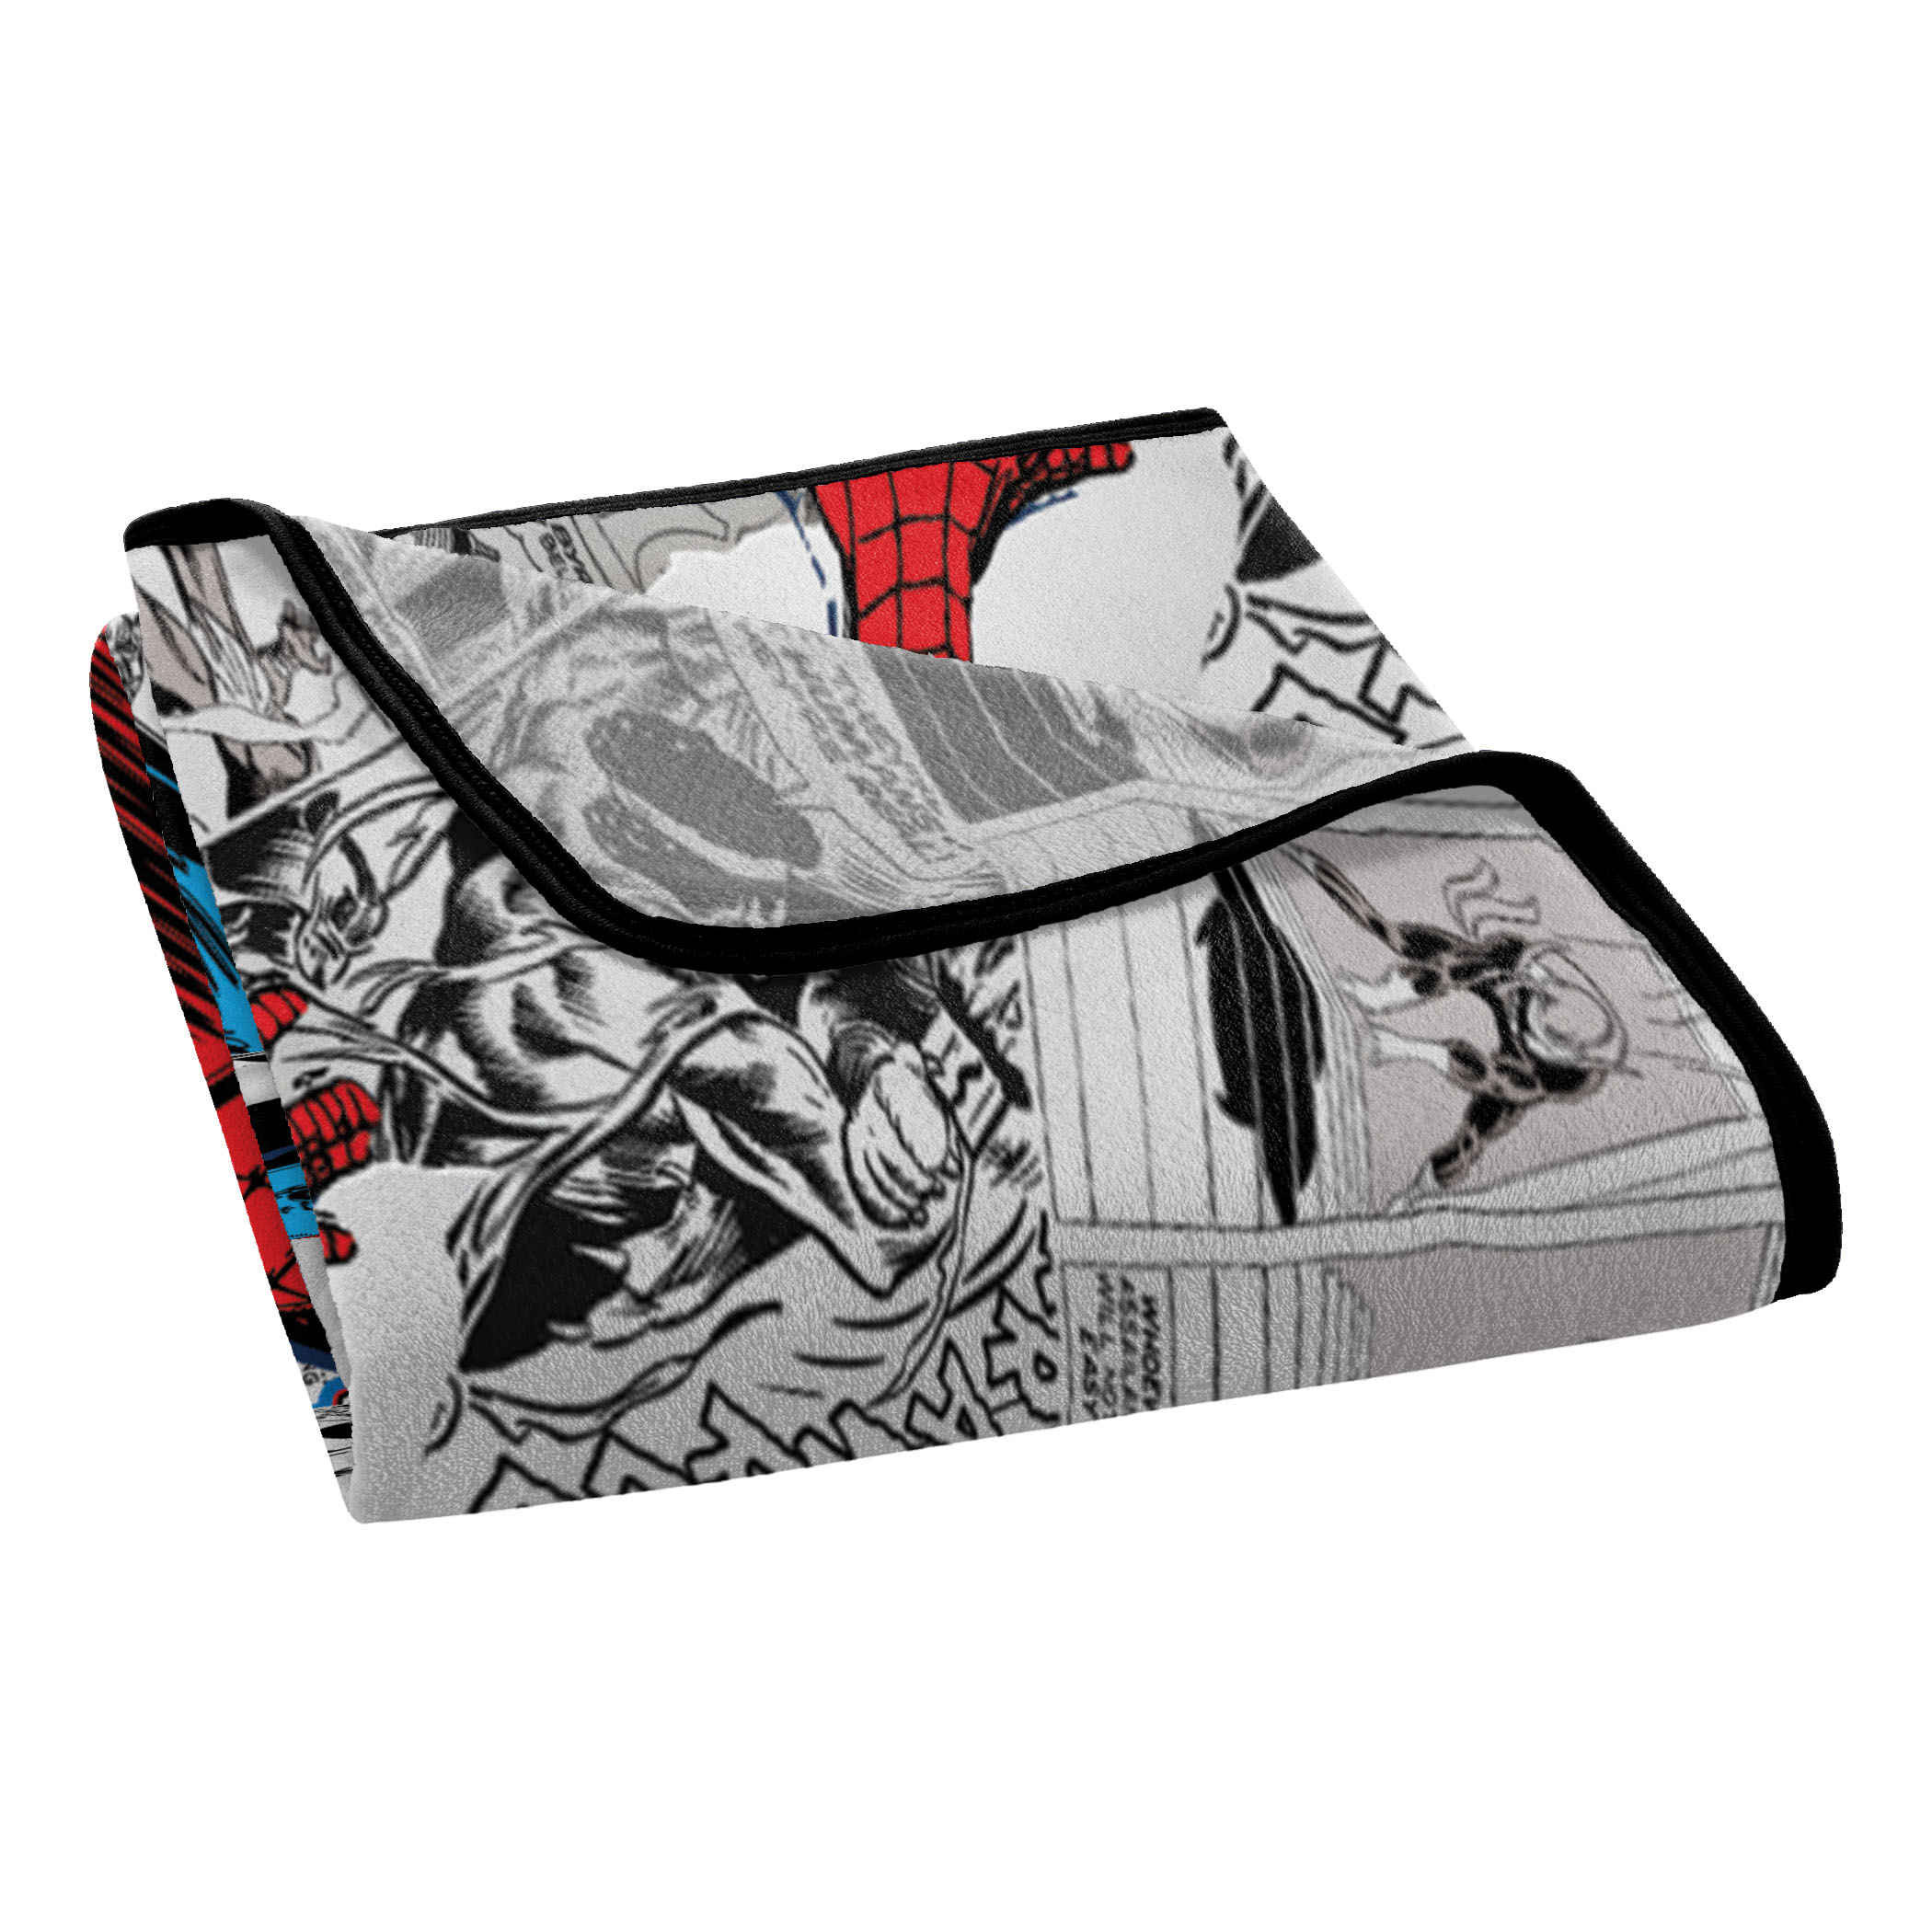 Spider-Man Swinging Through the Pages Micro Raschel Throw Blanket 46"x60"